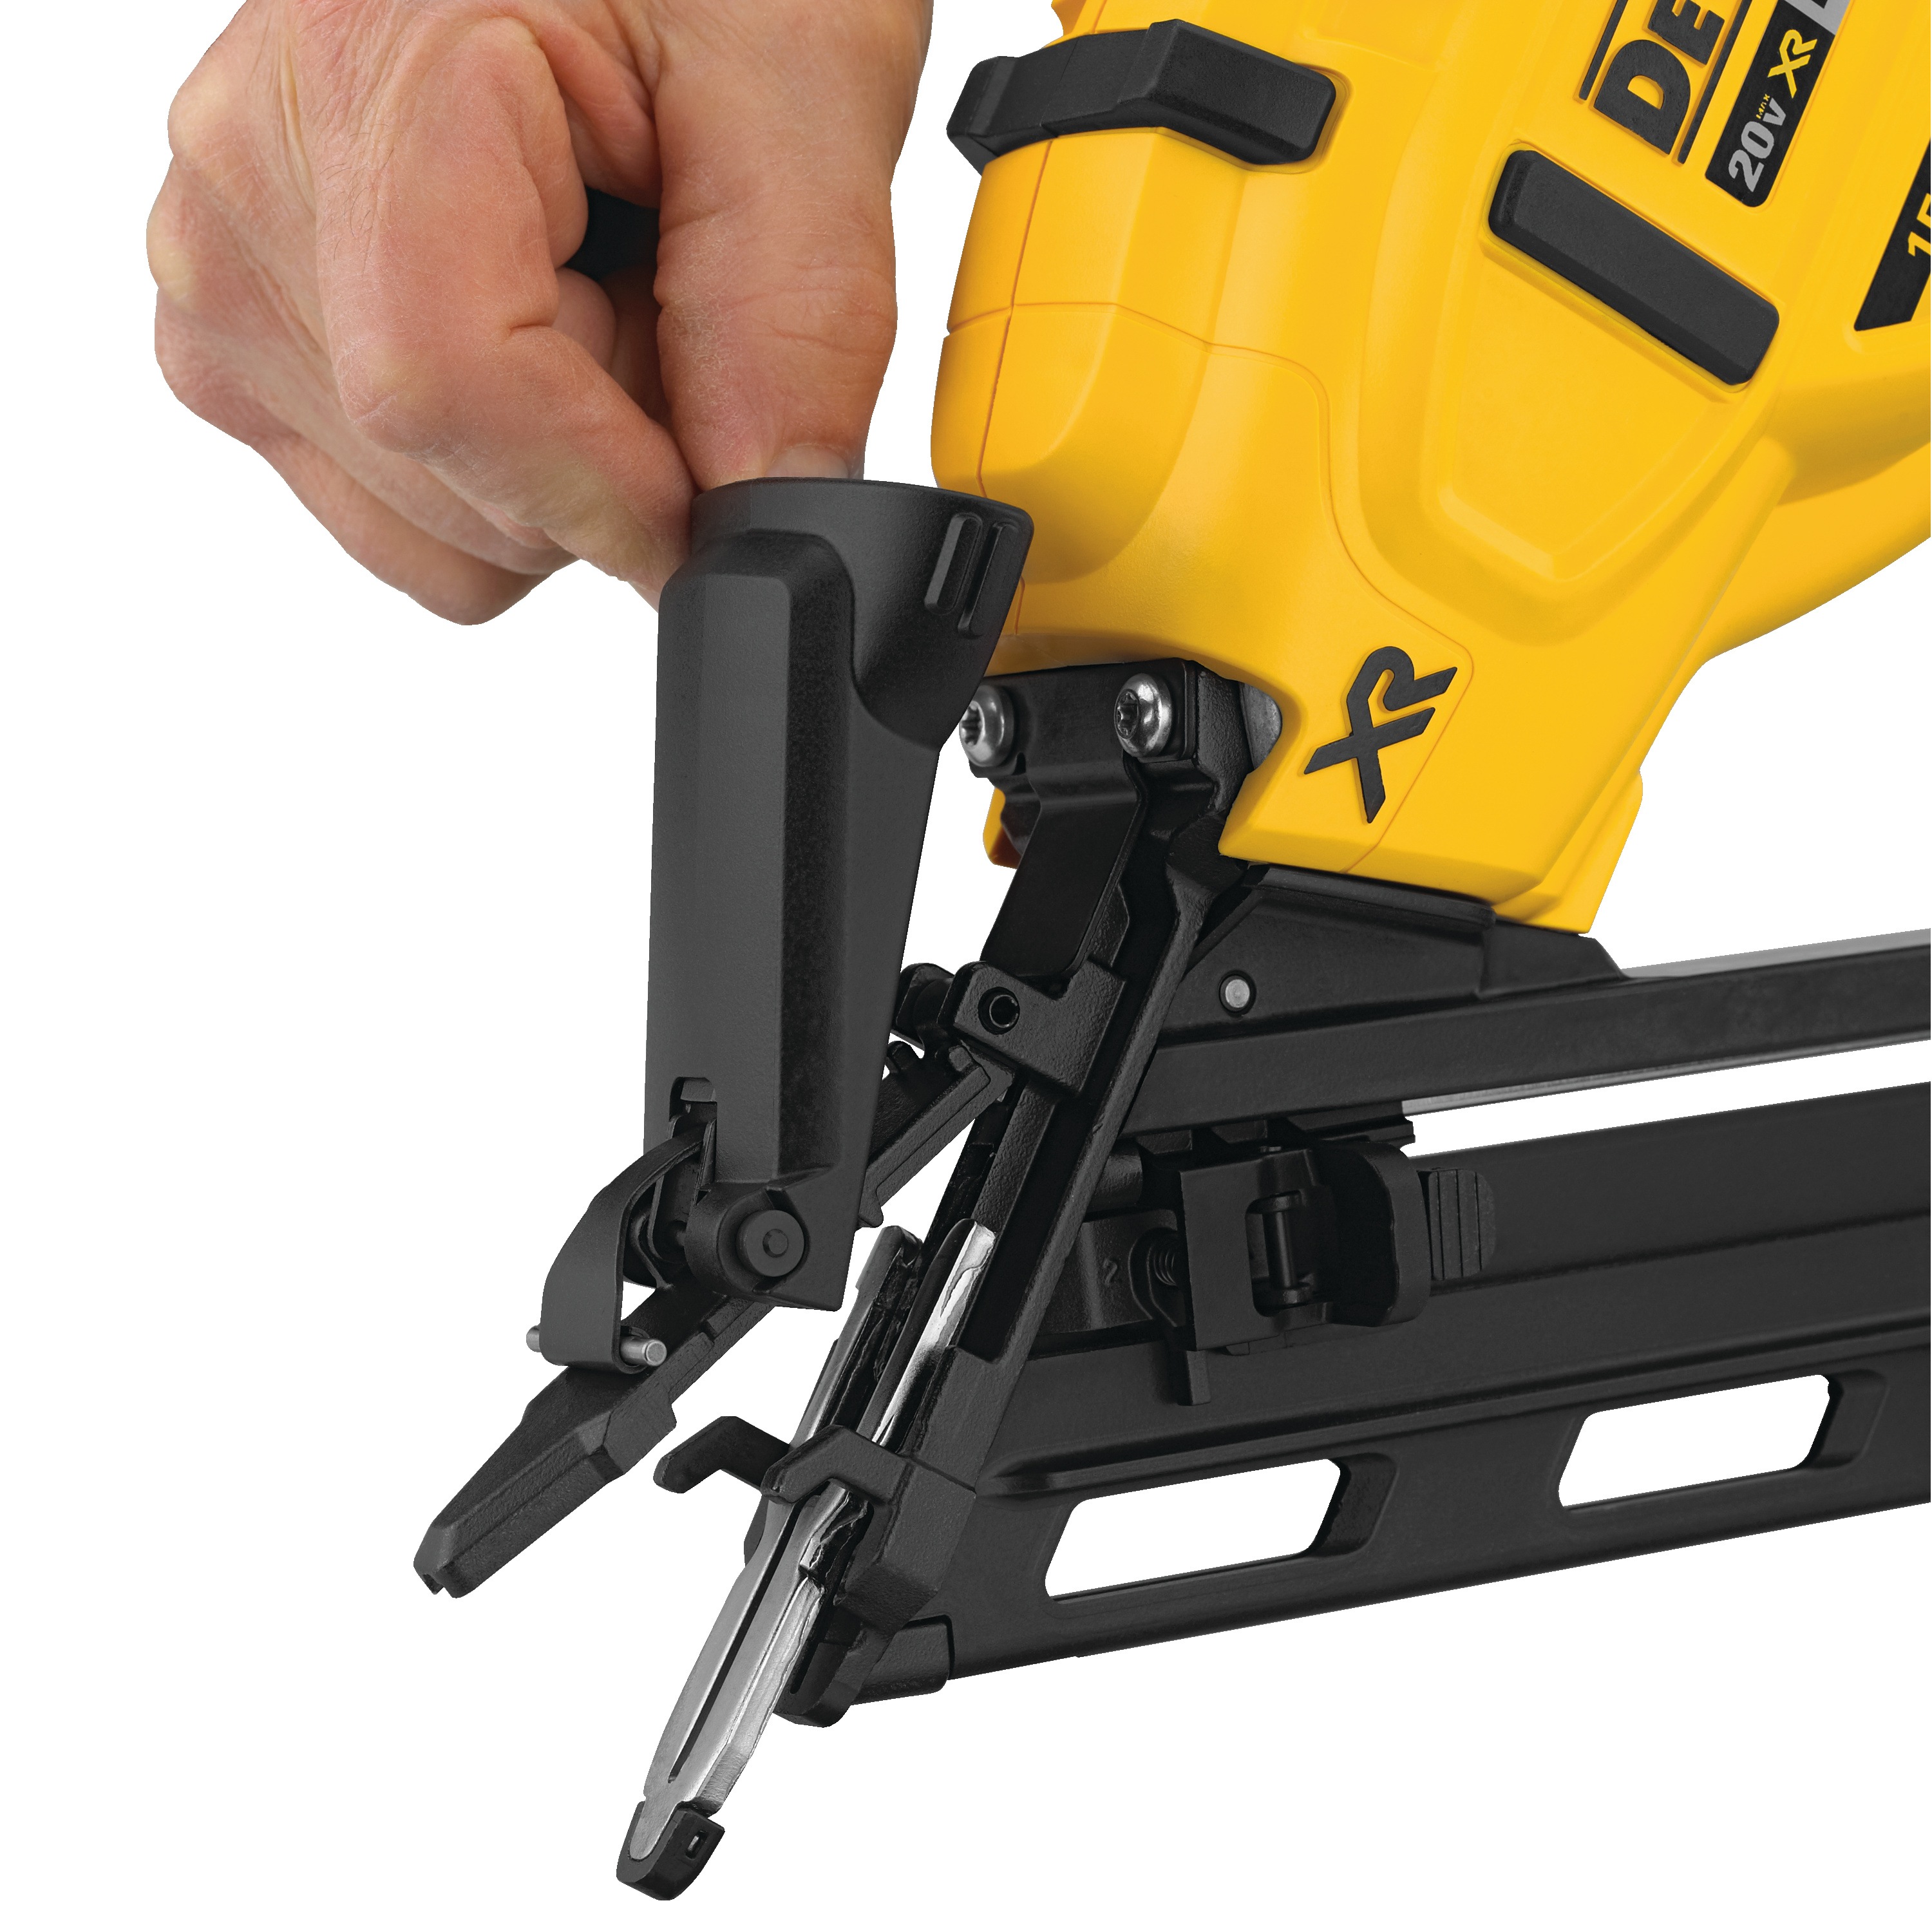 Angled nose piece feature of a  XR Cordless 15 Gauge Angled Finish Nailer